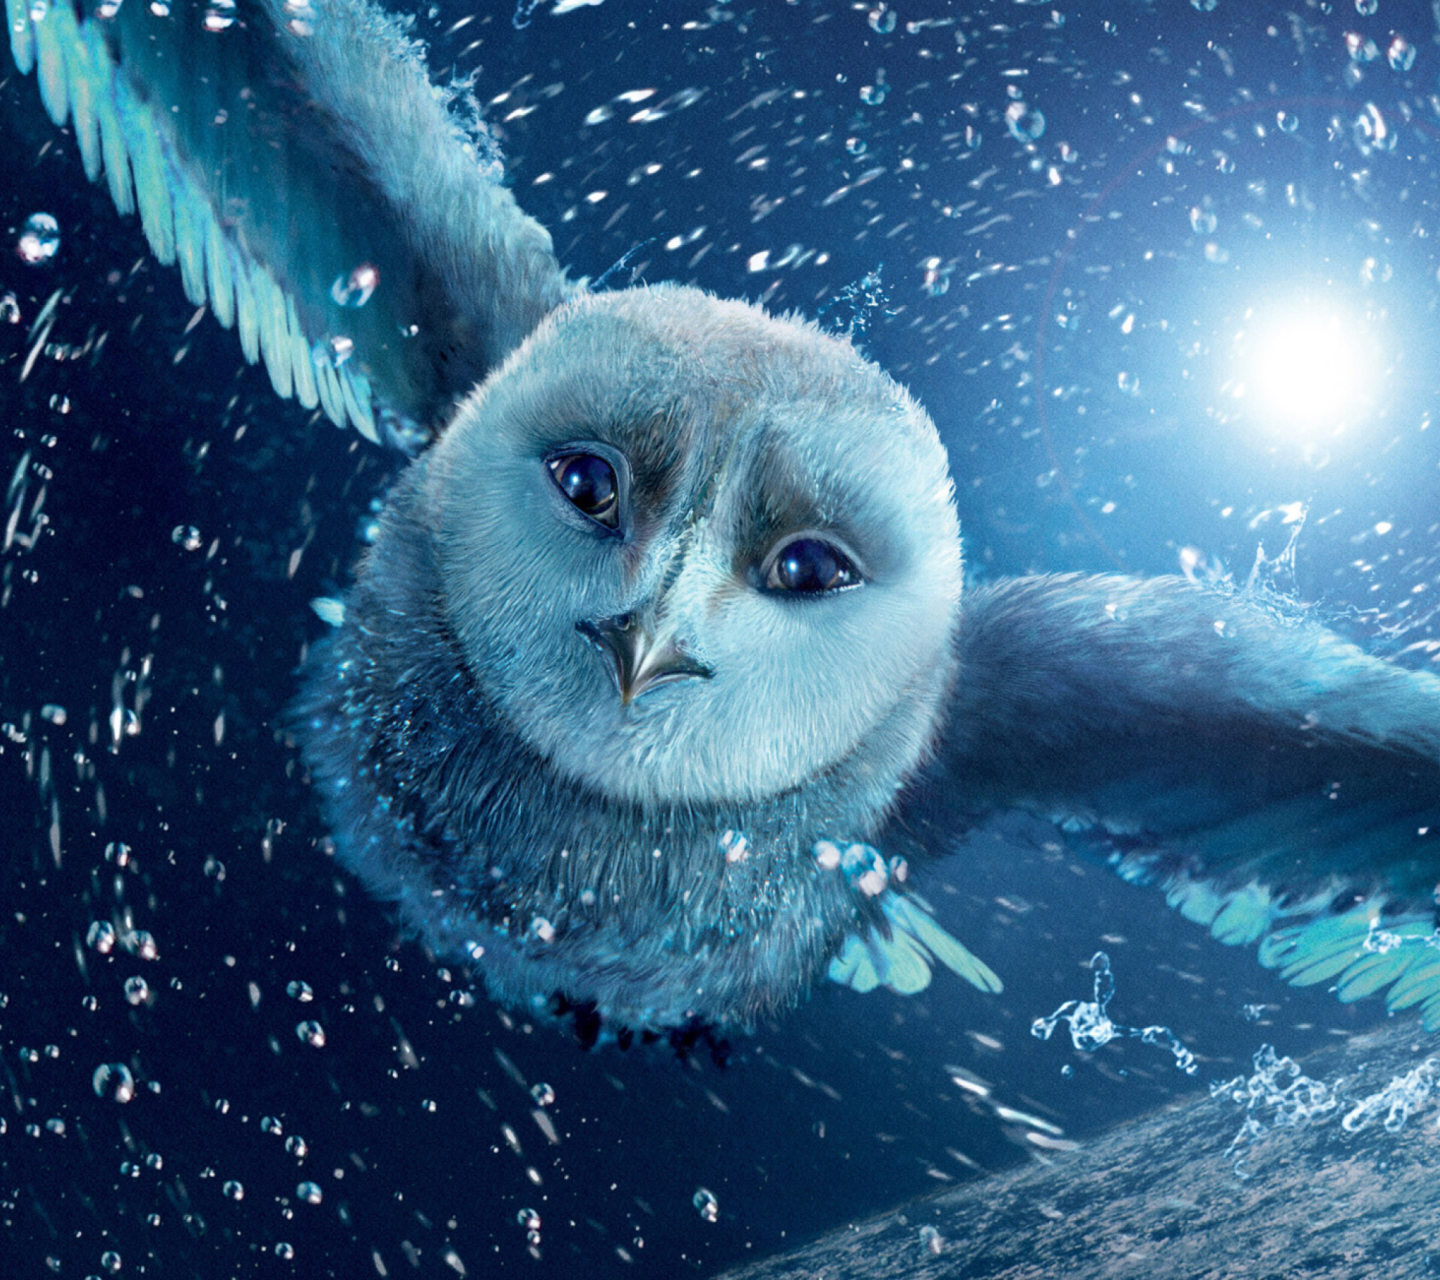 Legend Of The Guardians The Owls Of Ga Hoole wallpaper 1440x1280